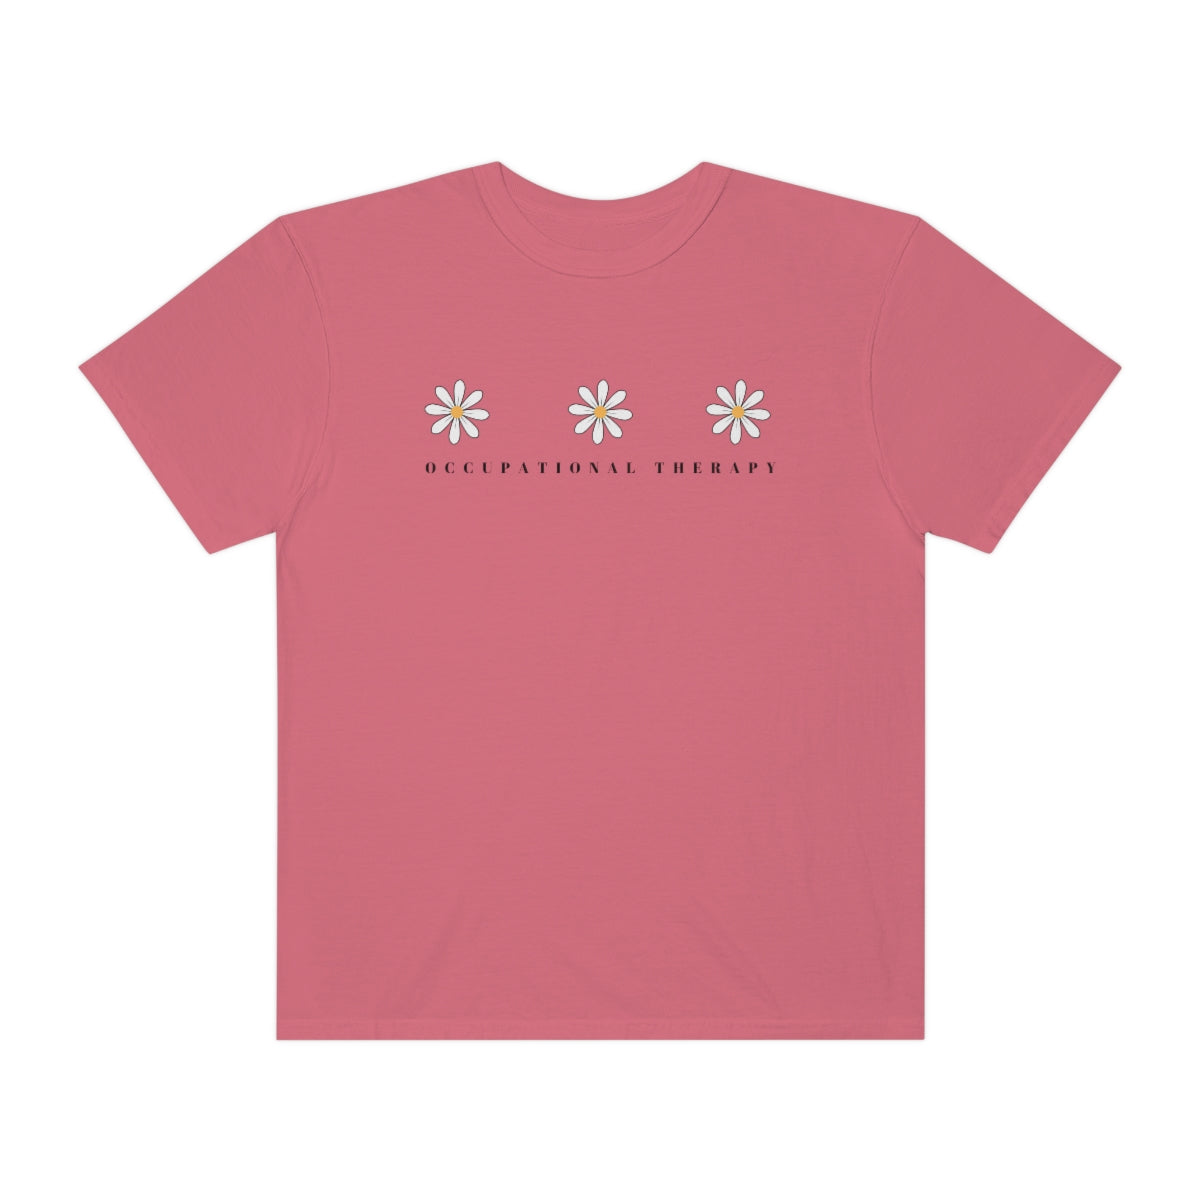 Daisy Occupational Therapy Comfort Colors T-Shirt